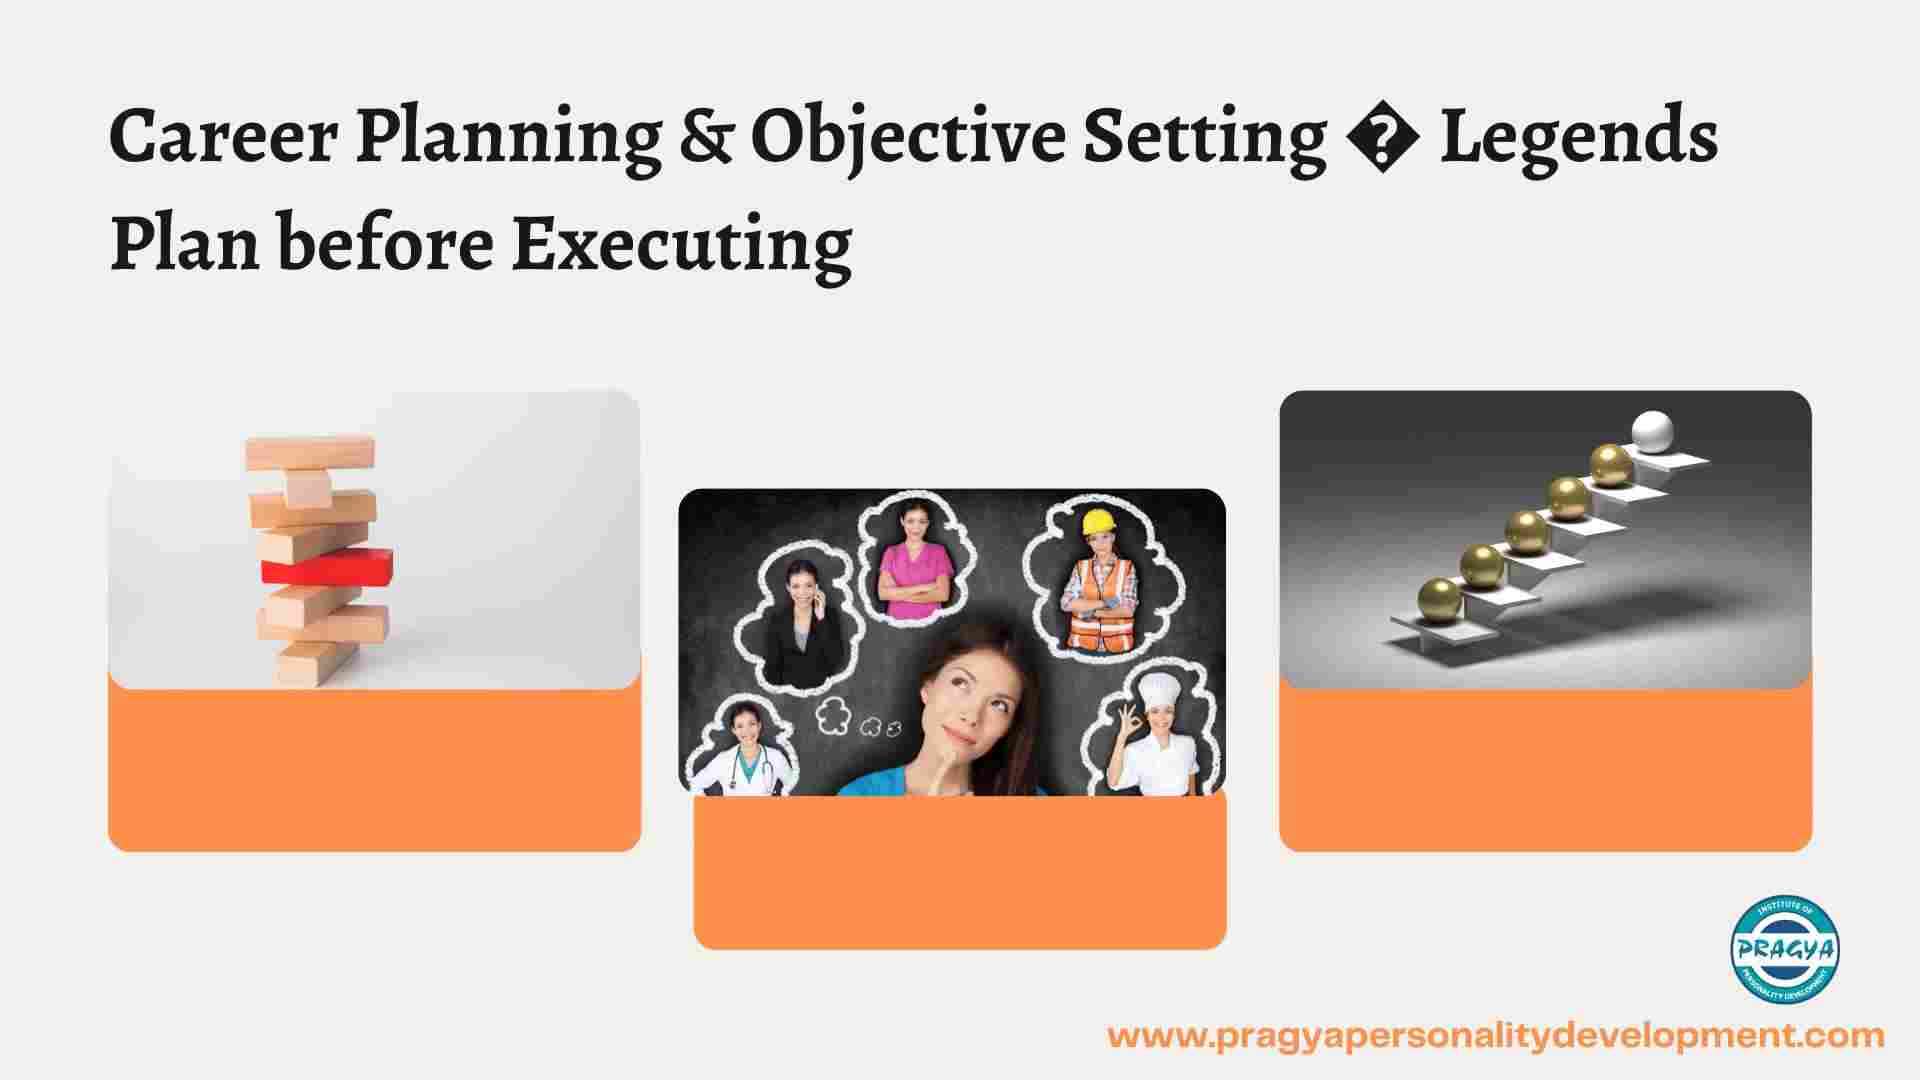 Career Planning & Objective Setting - Legends Plan before Executing